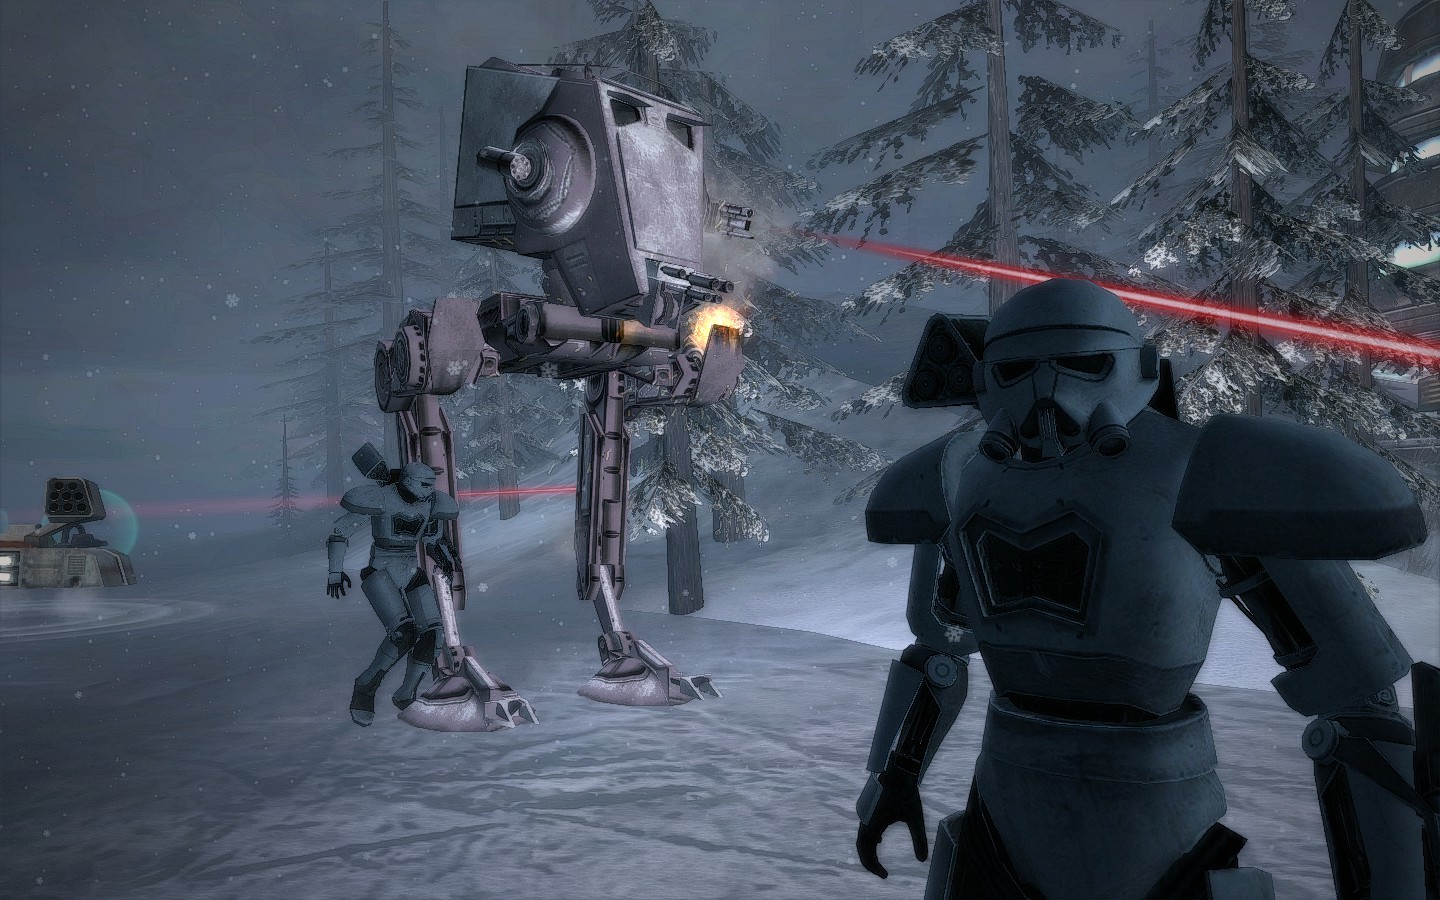 Mod DB - The final version of the Star Wars Battlefront II